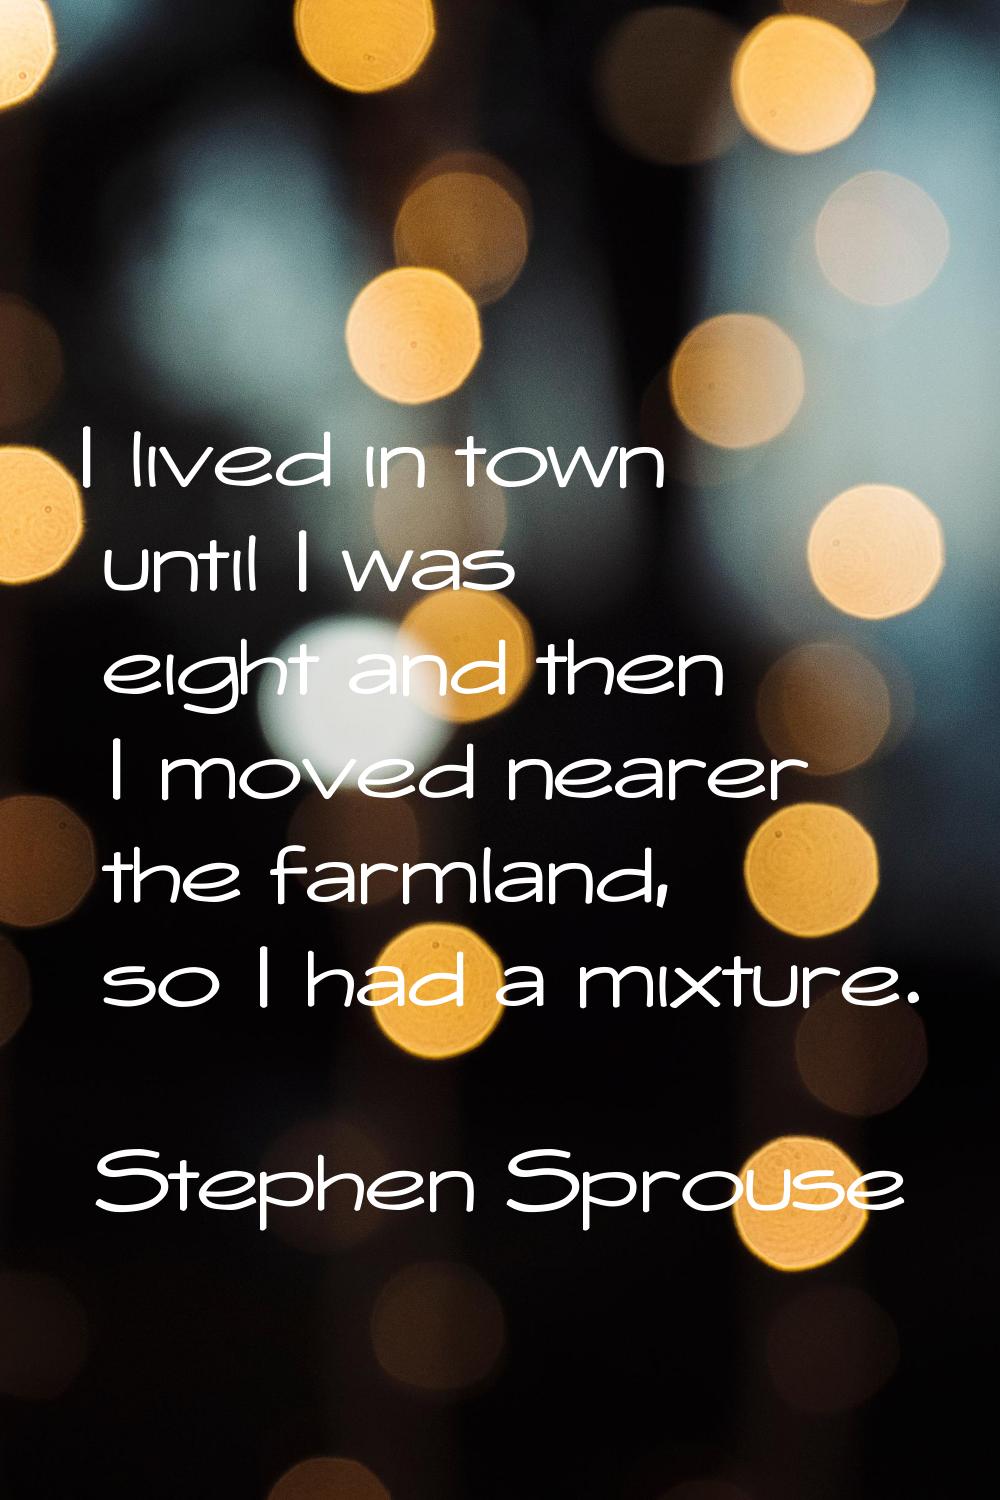 I lived in town until I was eight and then I moved nearer the farmland, so I had a mixture.